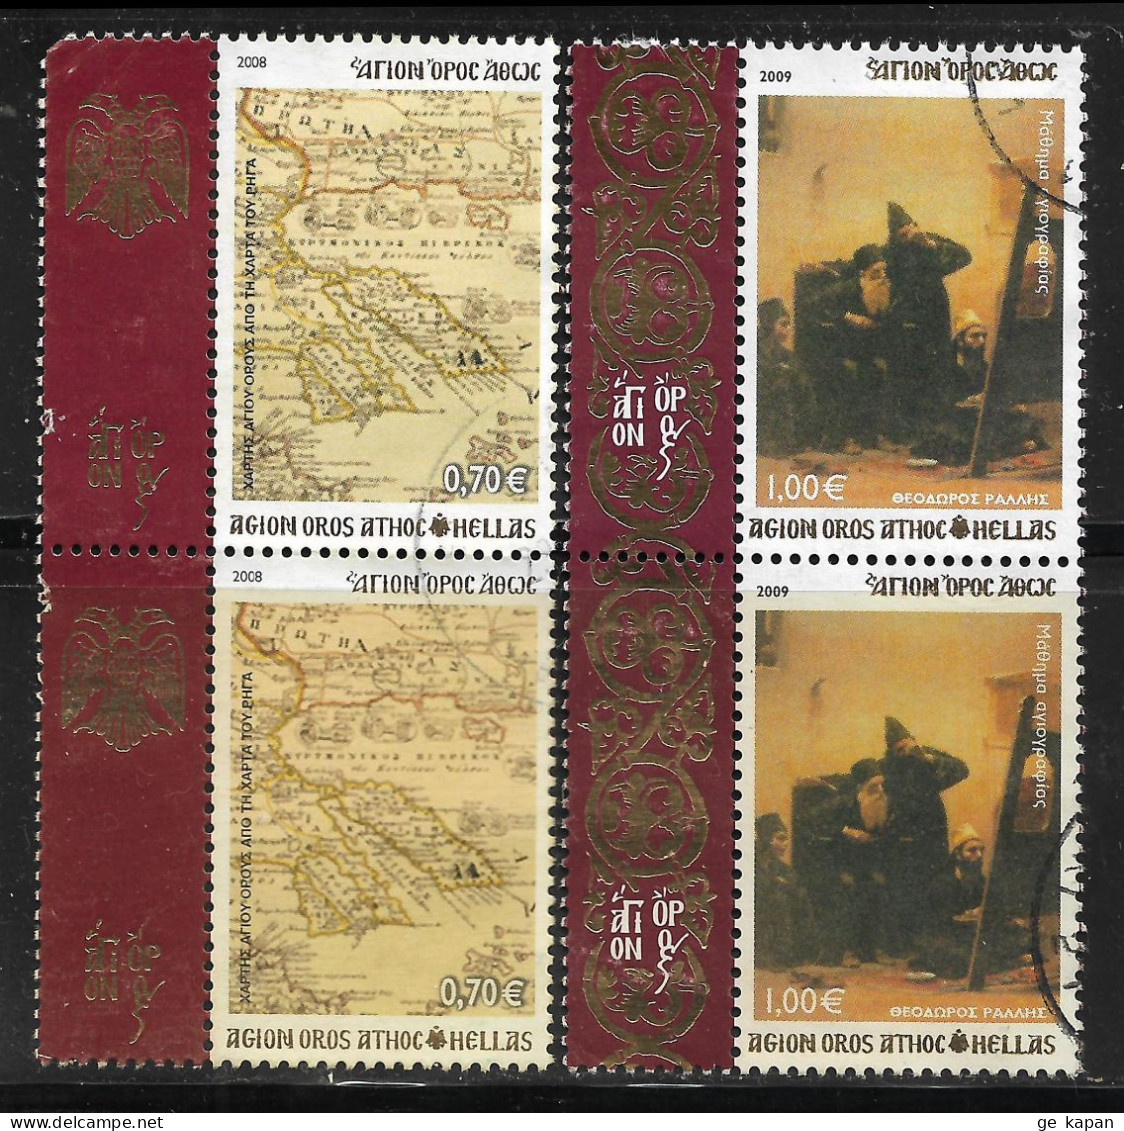 2008,2009 GREECE Mount Athos Set Of 2 Used Pair Stamps (Scott # 3,39) CV $10.50 - Used Stamps